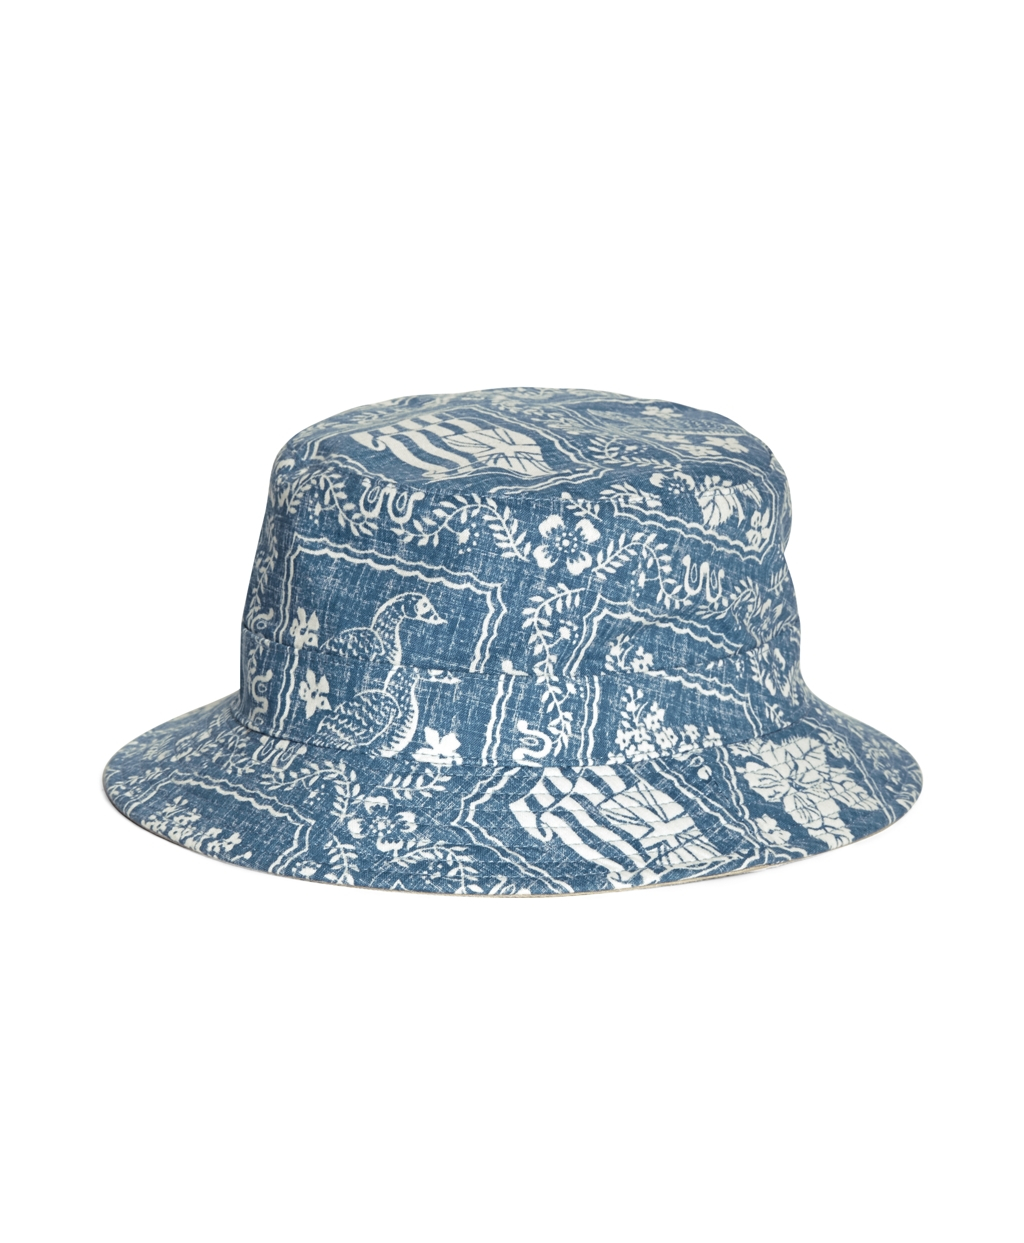 Lyst - Brooks Brothers Tropical Print Bucket Hat in Blue for Men